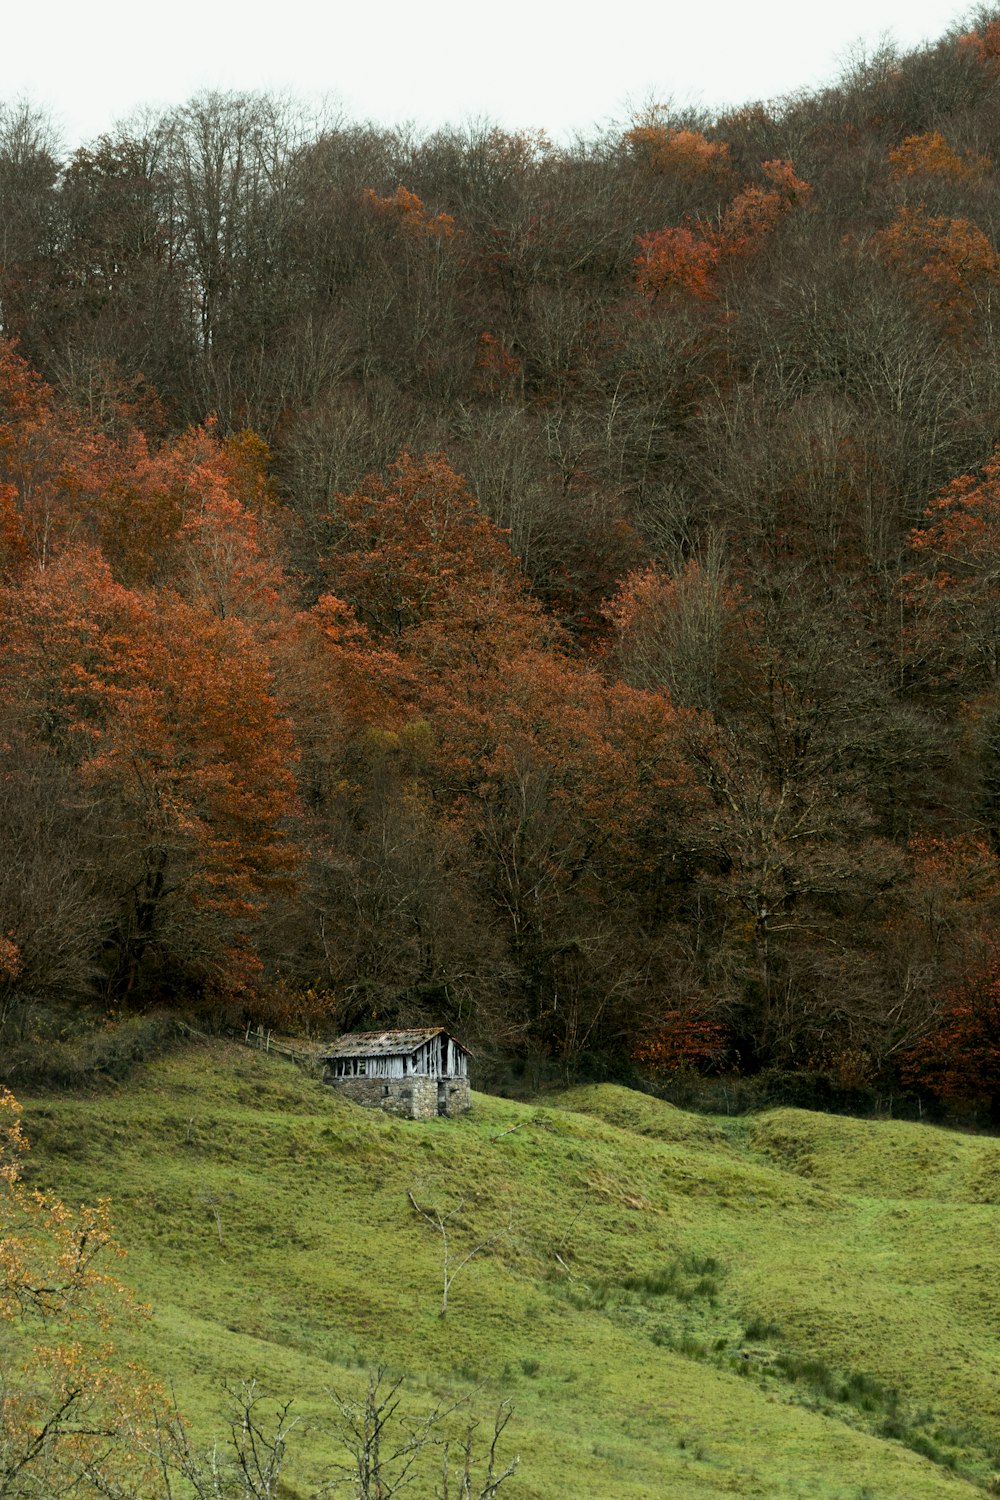 a house in the middle of a field with trees in the background